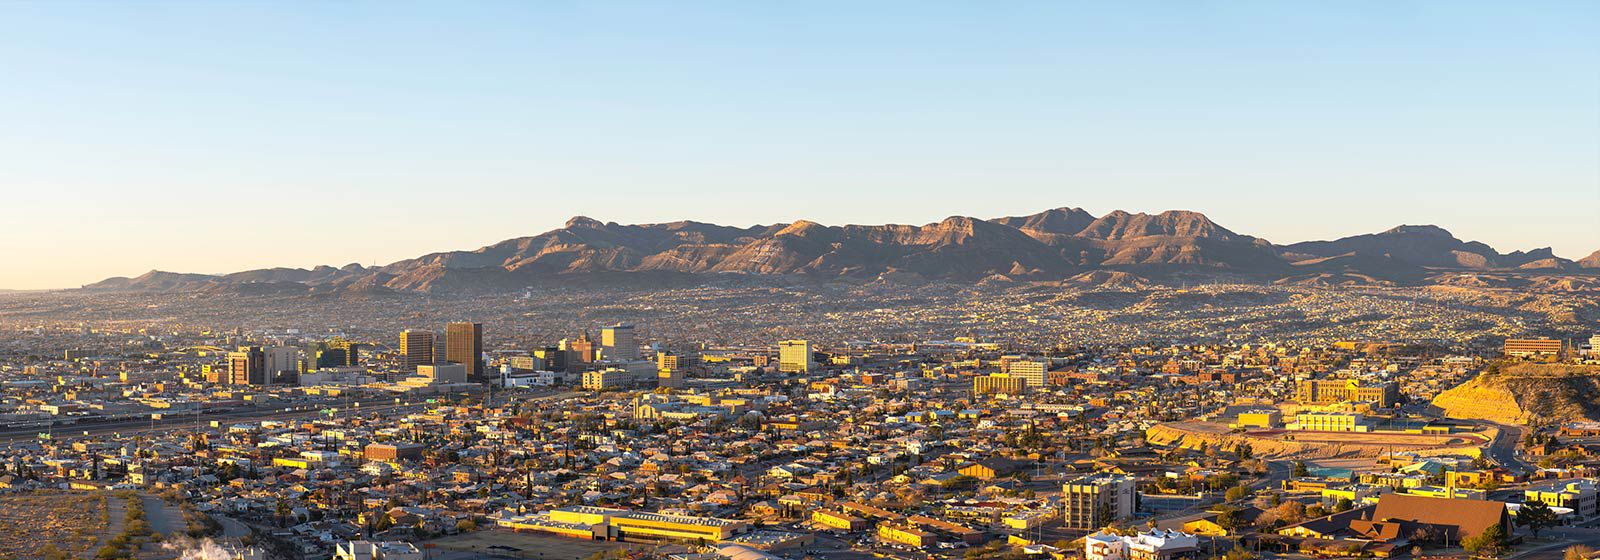 Panoramic view of the skyline of Chihuahua